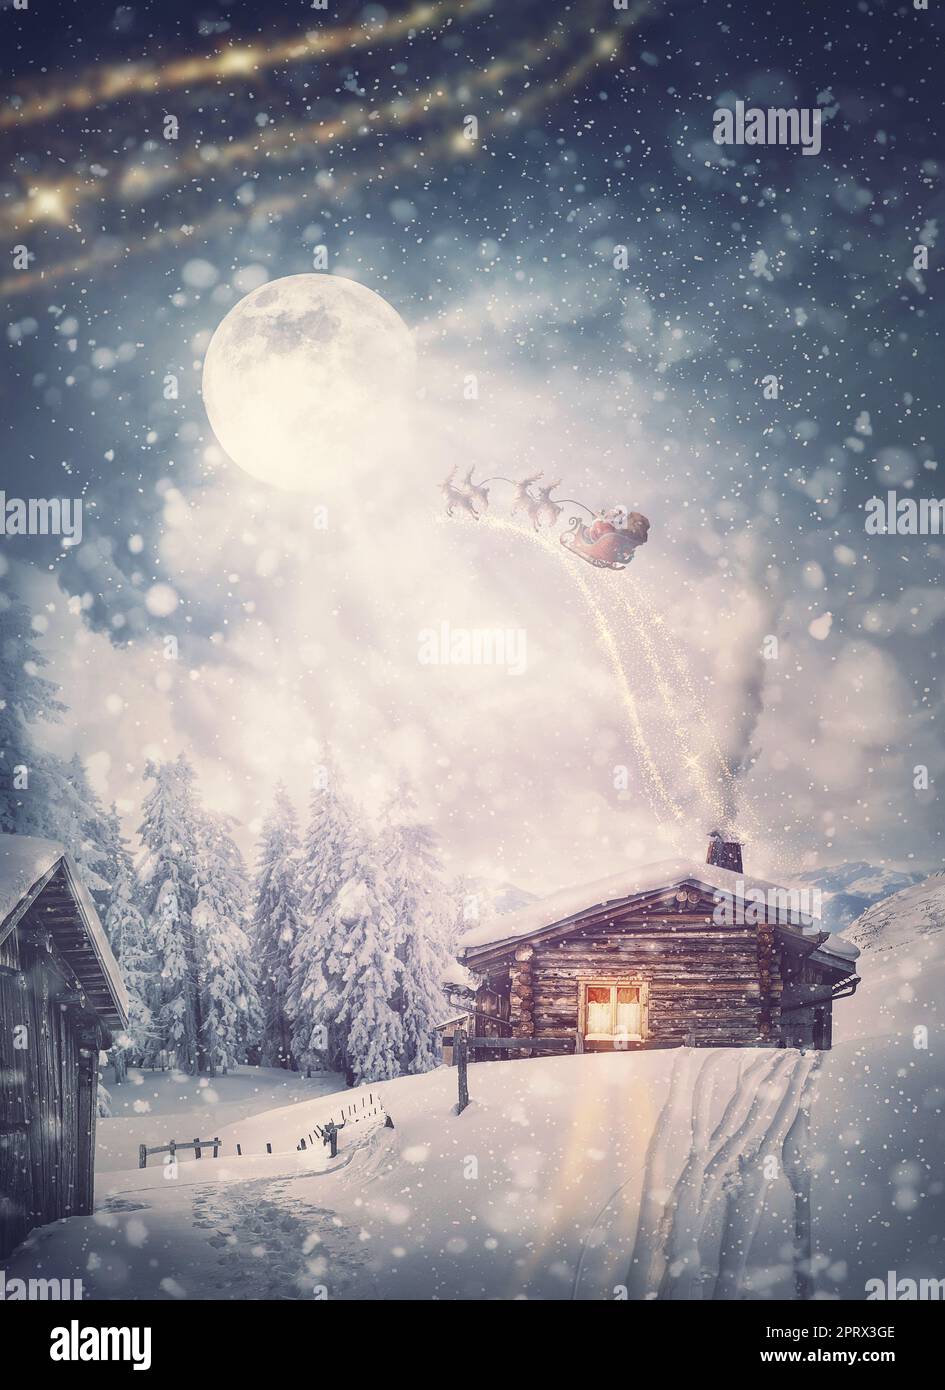 Magical holiday scene and Santa Claus sleigh with reindeers flying above the snowy house in the Christmas Eve. Wonderful snowflakes covering the village, and the full moon comes out of the clouds Stock Photo